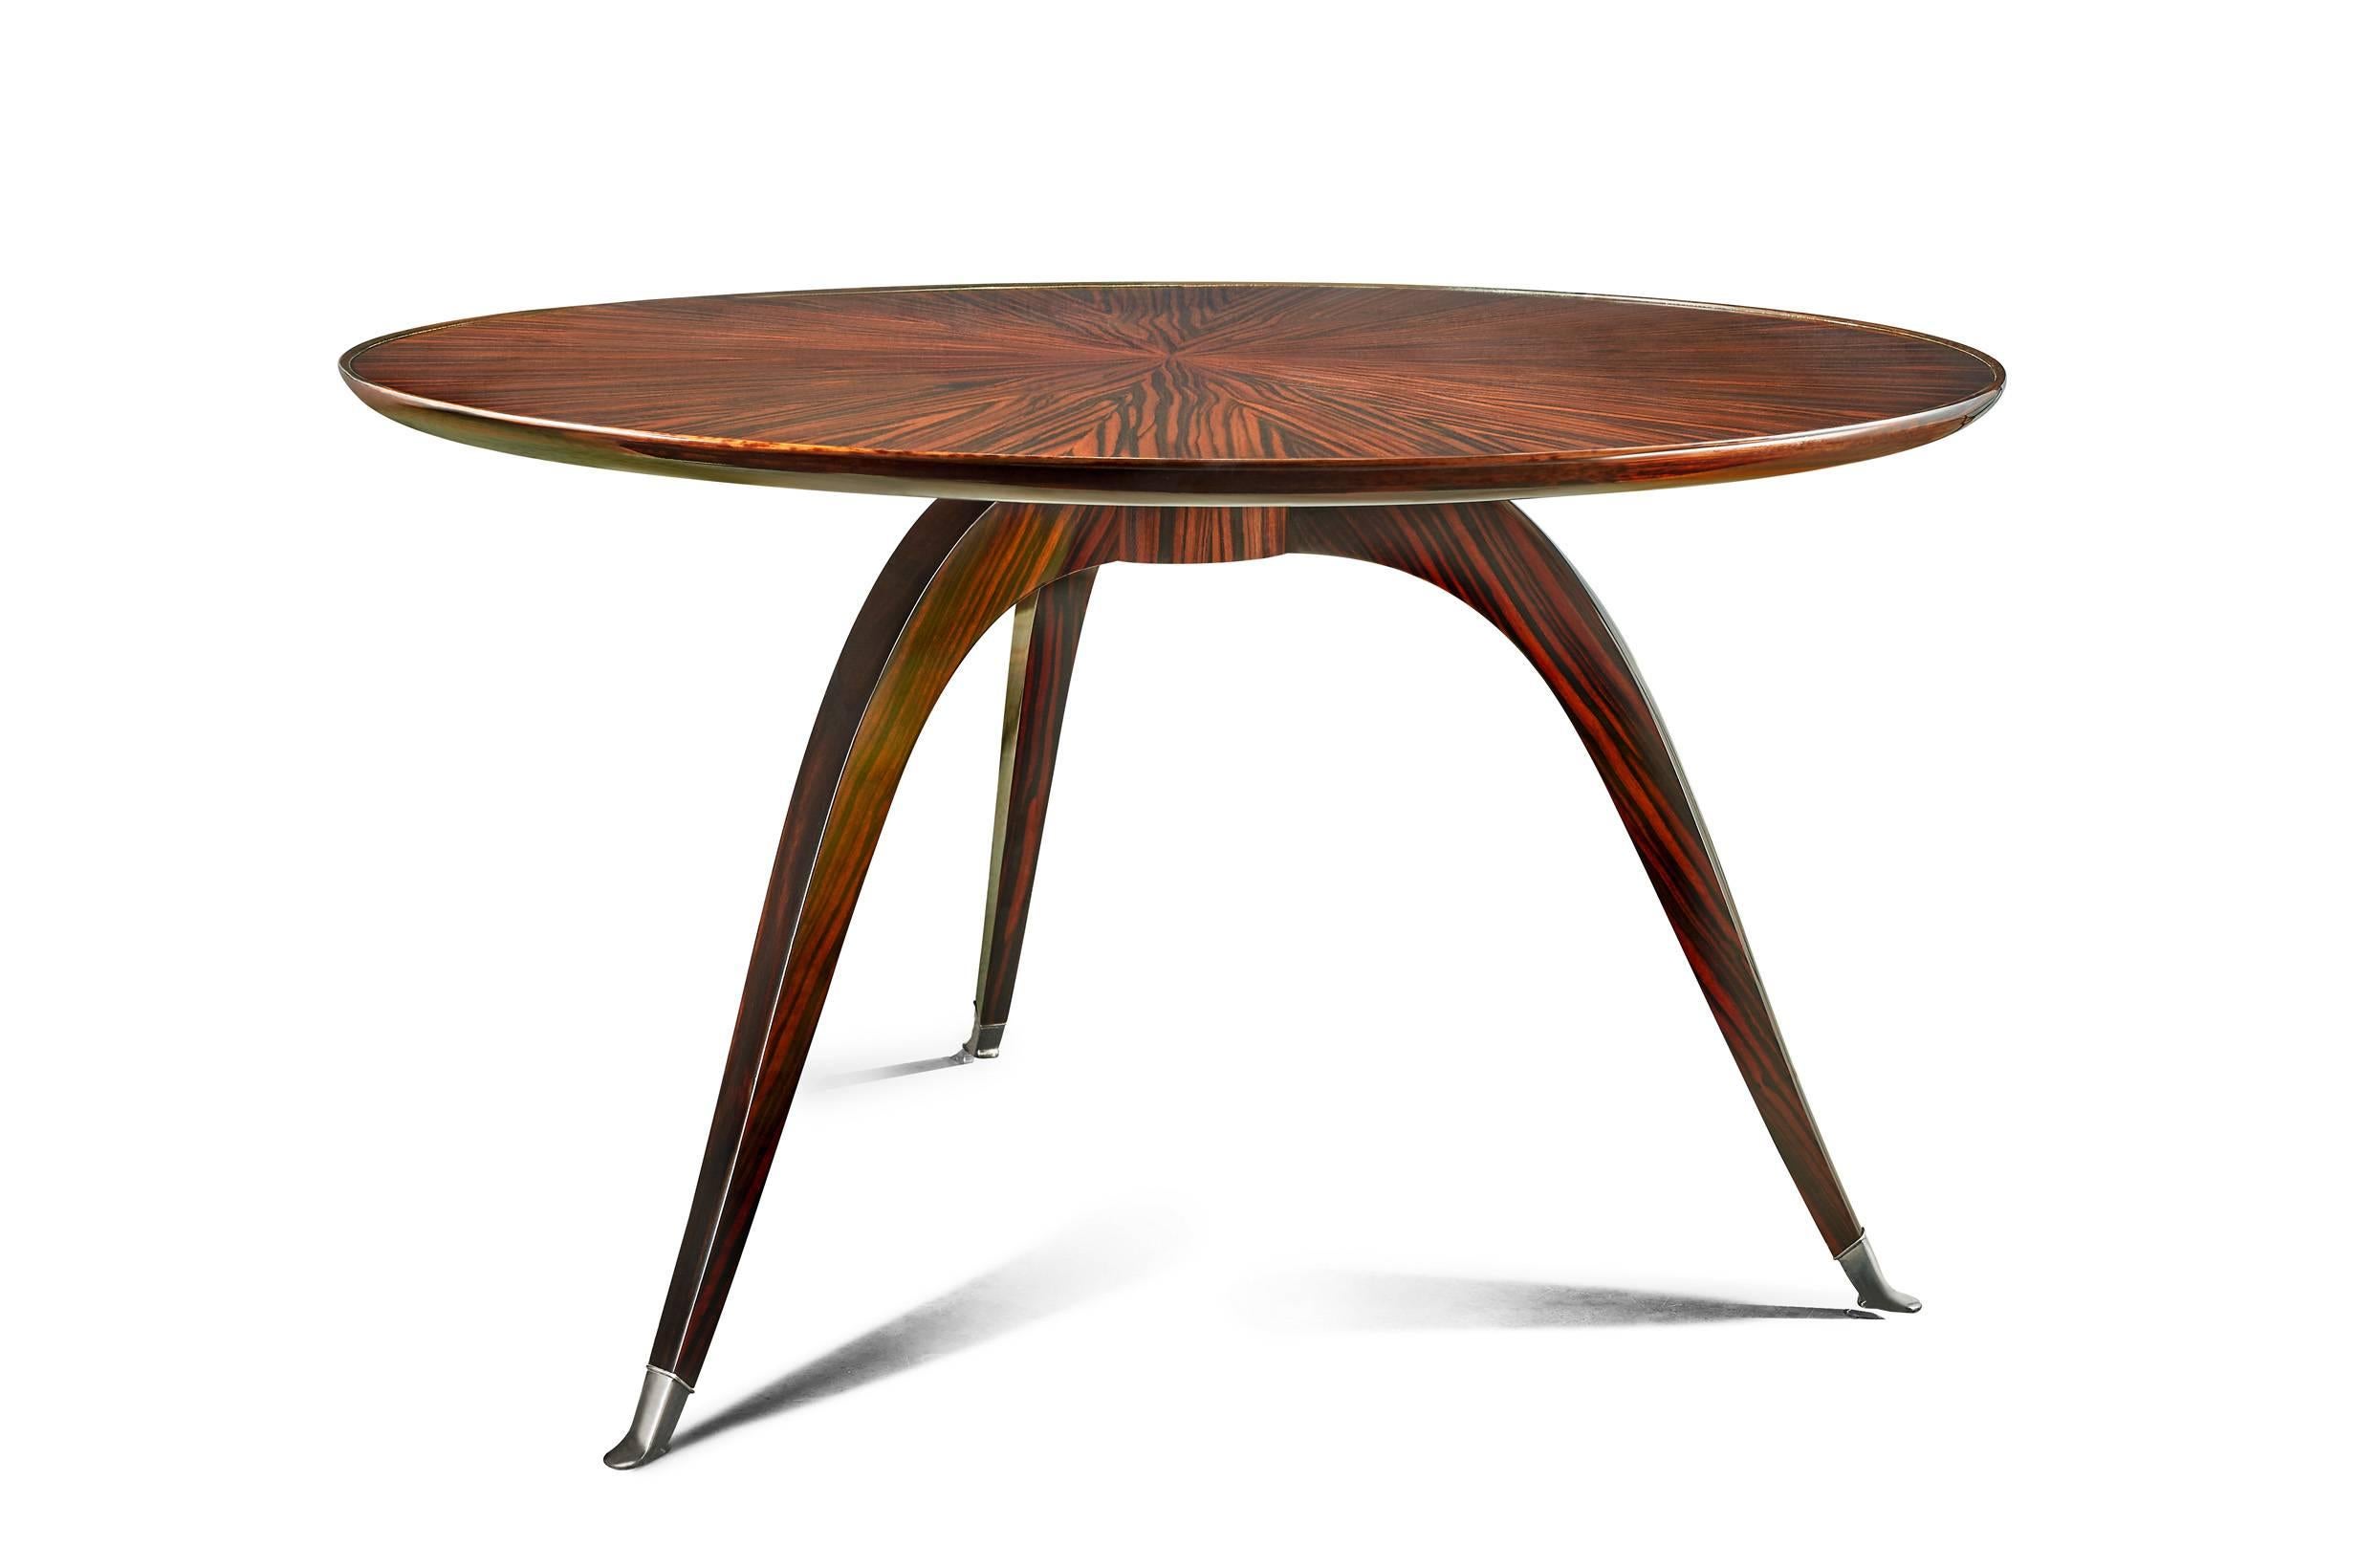 Inspired by Ruhlmann creations, this table was by created by Rinck in 2006.

Details : 

Macassar ebony sunburn top,
silvered bronze sabots,
varnish finishing.